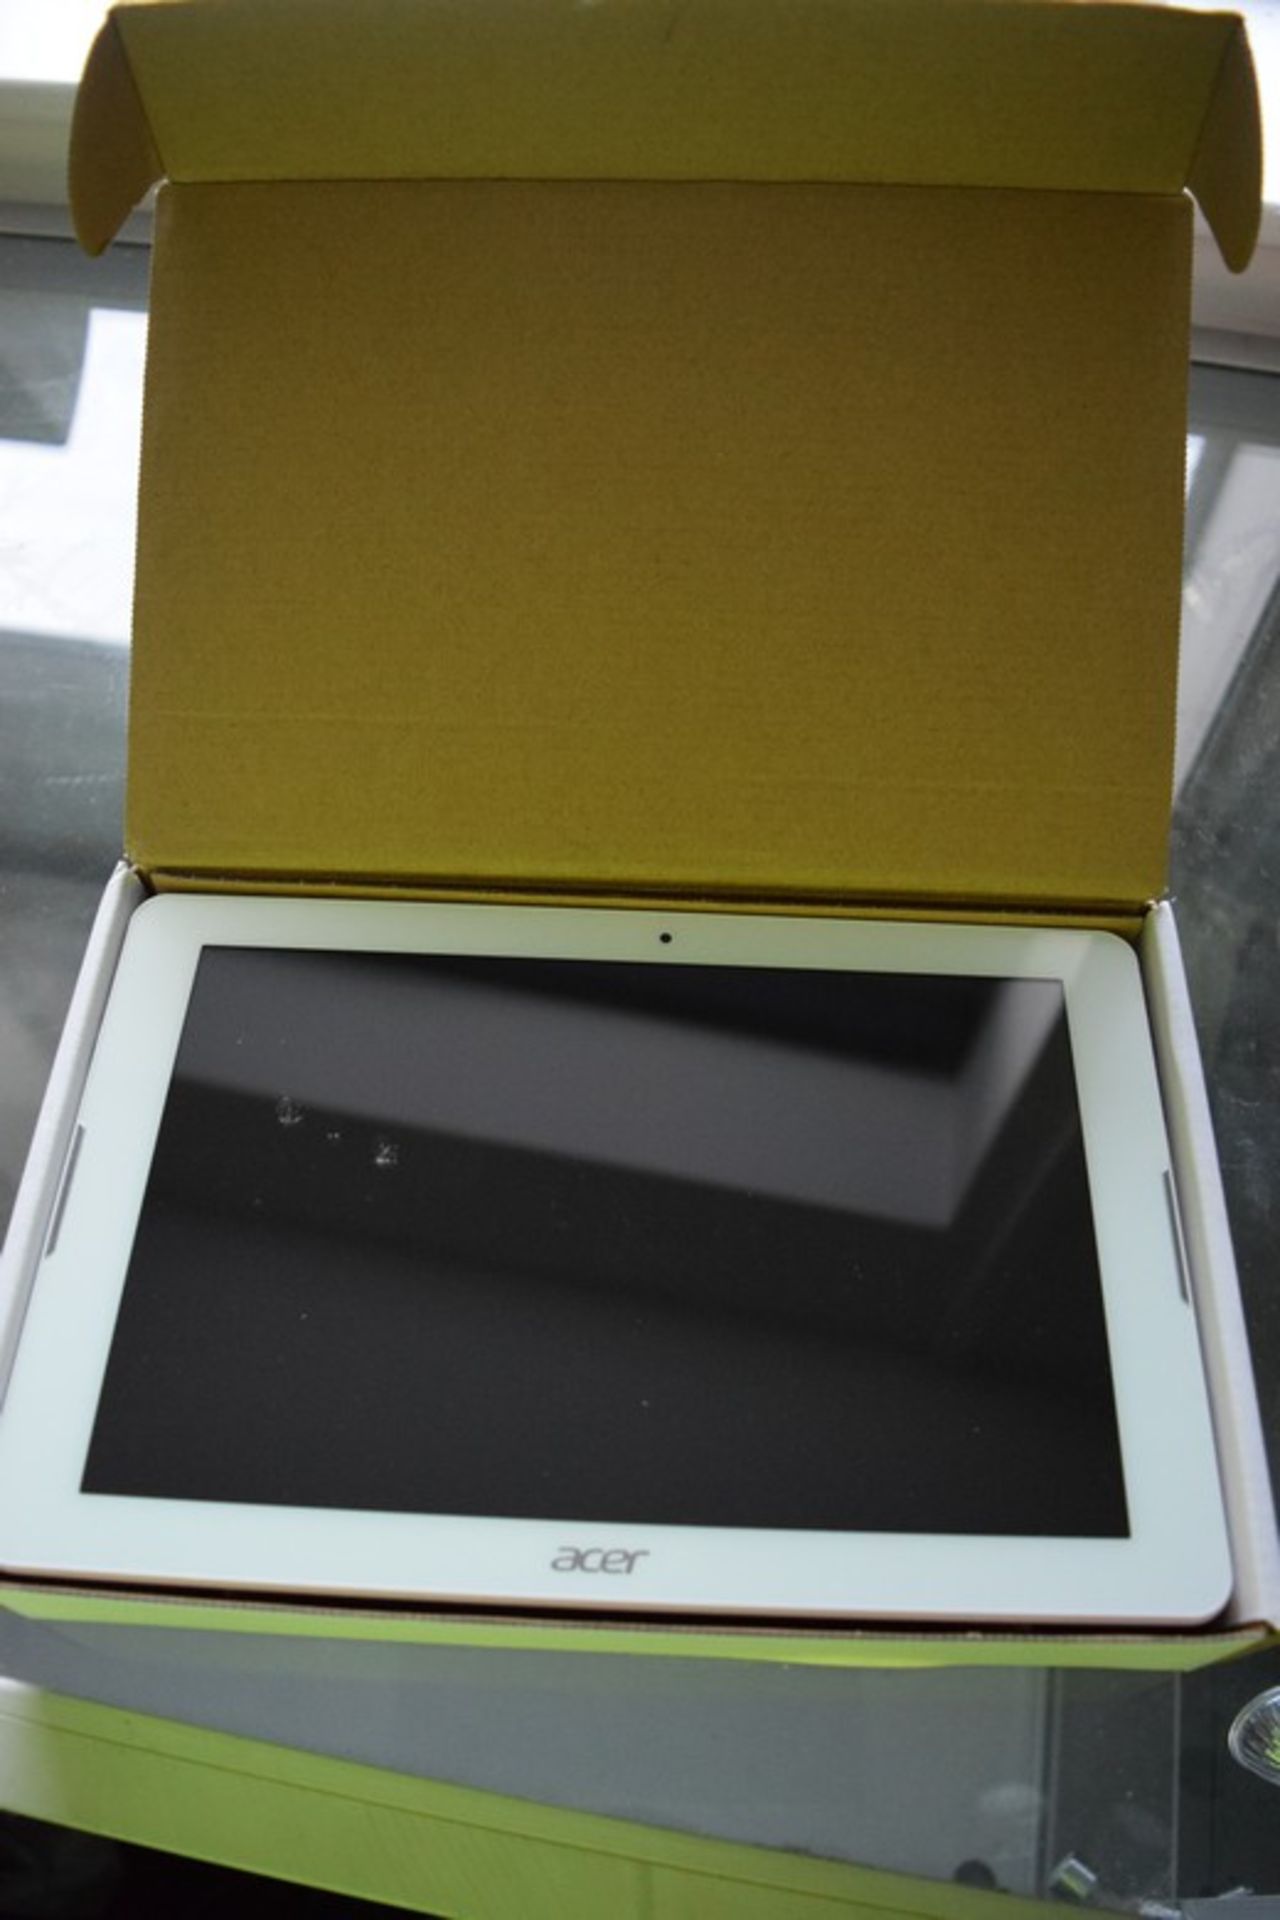 1 x BOXED ACER ICONIA ONE10 TABLET WITH 32GB INTERNAL HARD DRIVE ANDROID 5.1 5MP CAMERA MICRO SD